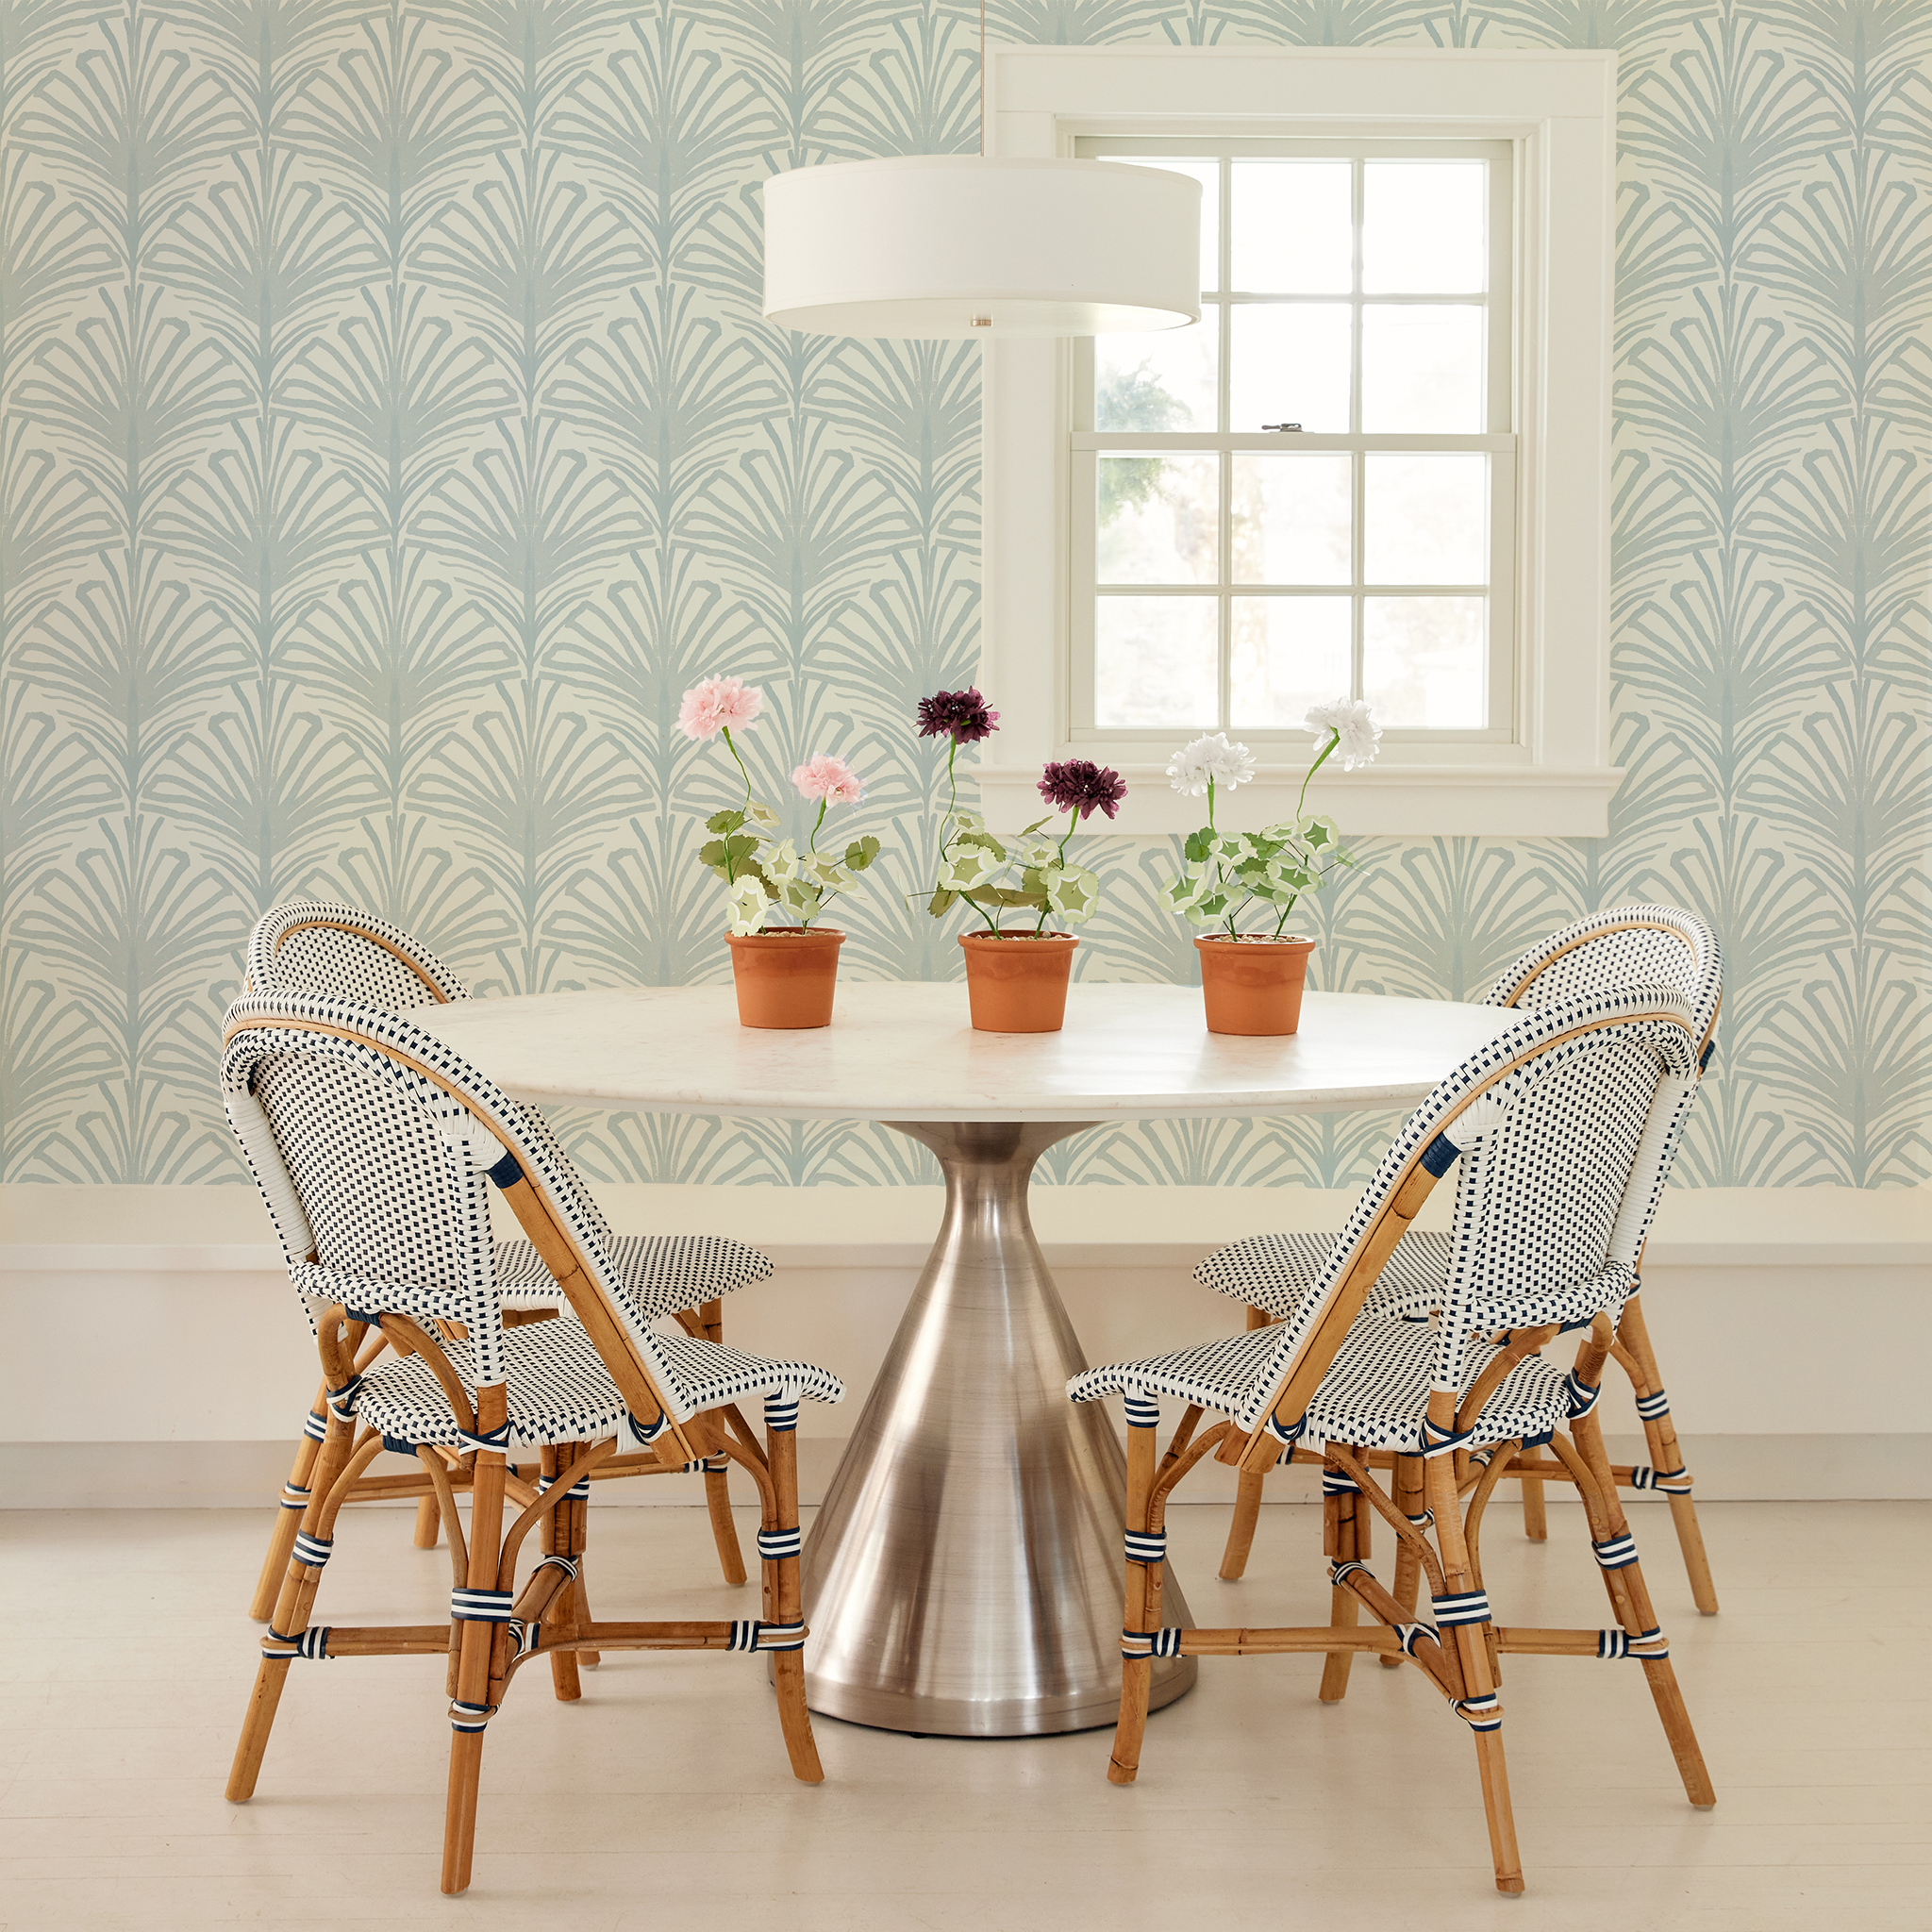 Circular table with flowers on three clay pots with 4 wooden chairs around it next to an illuminated window styled with a Sky Blue Palm Printed Wallpaper